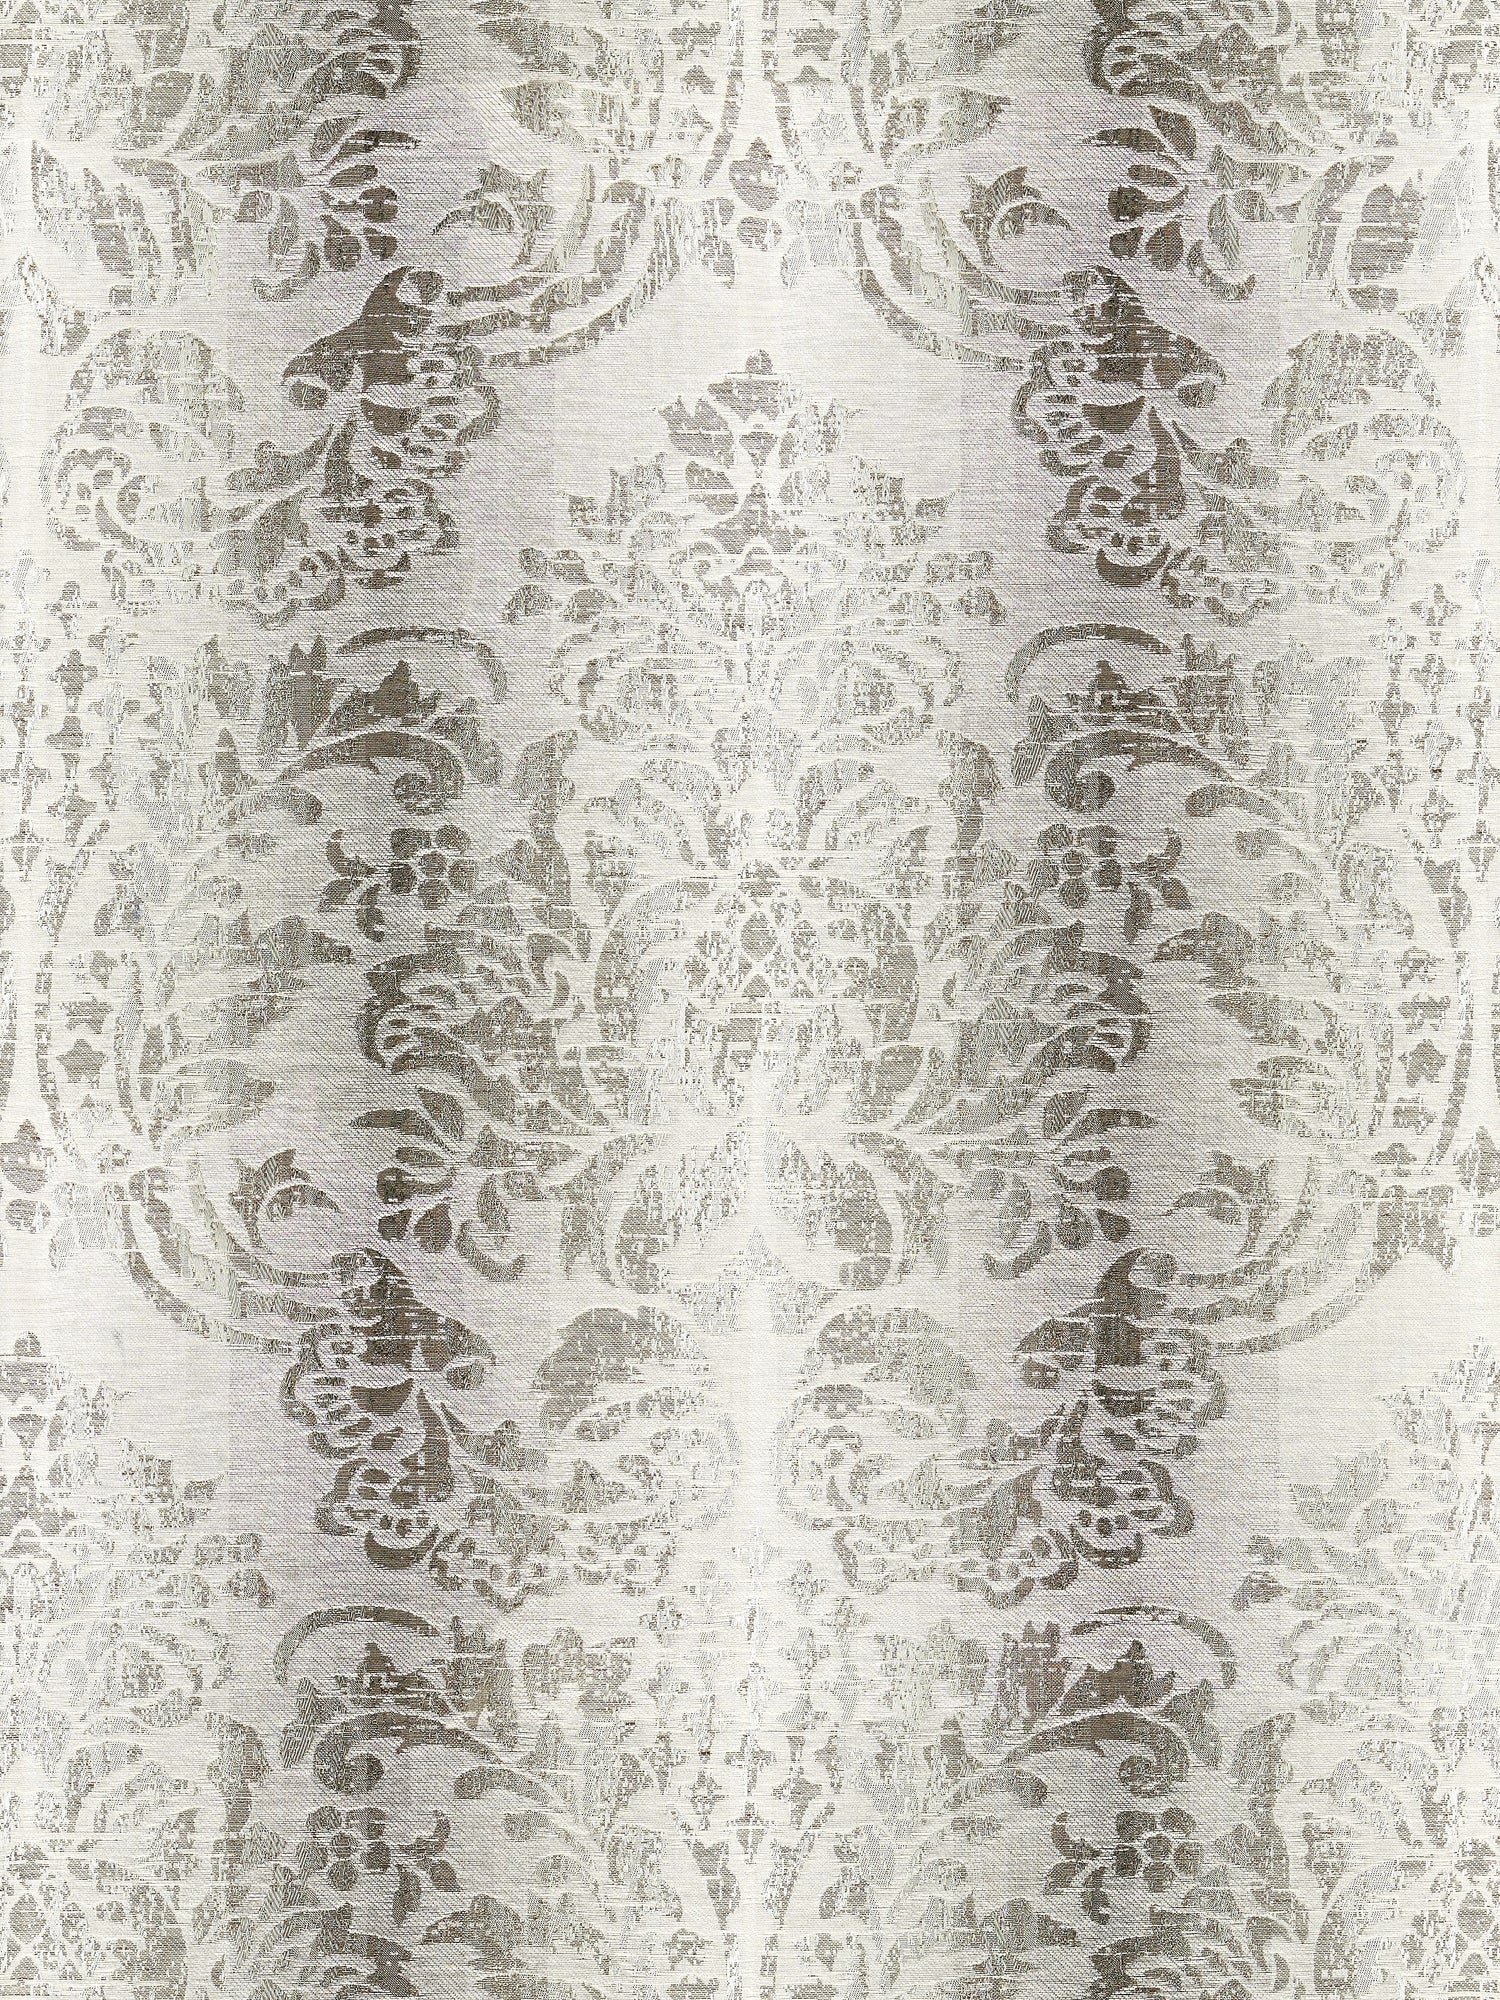 Sorrento Linen Damask fabric in zinc color - pattern number SC 000327093 - by Scalamandre in the Scalamandre Fabrics Book 1 collection